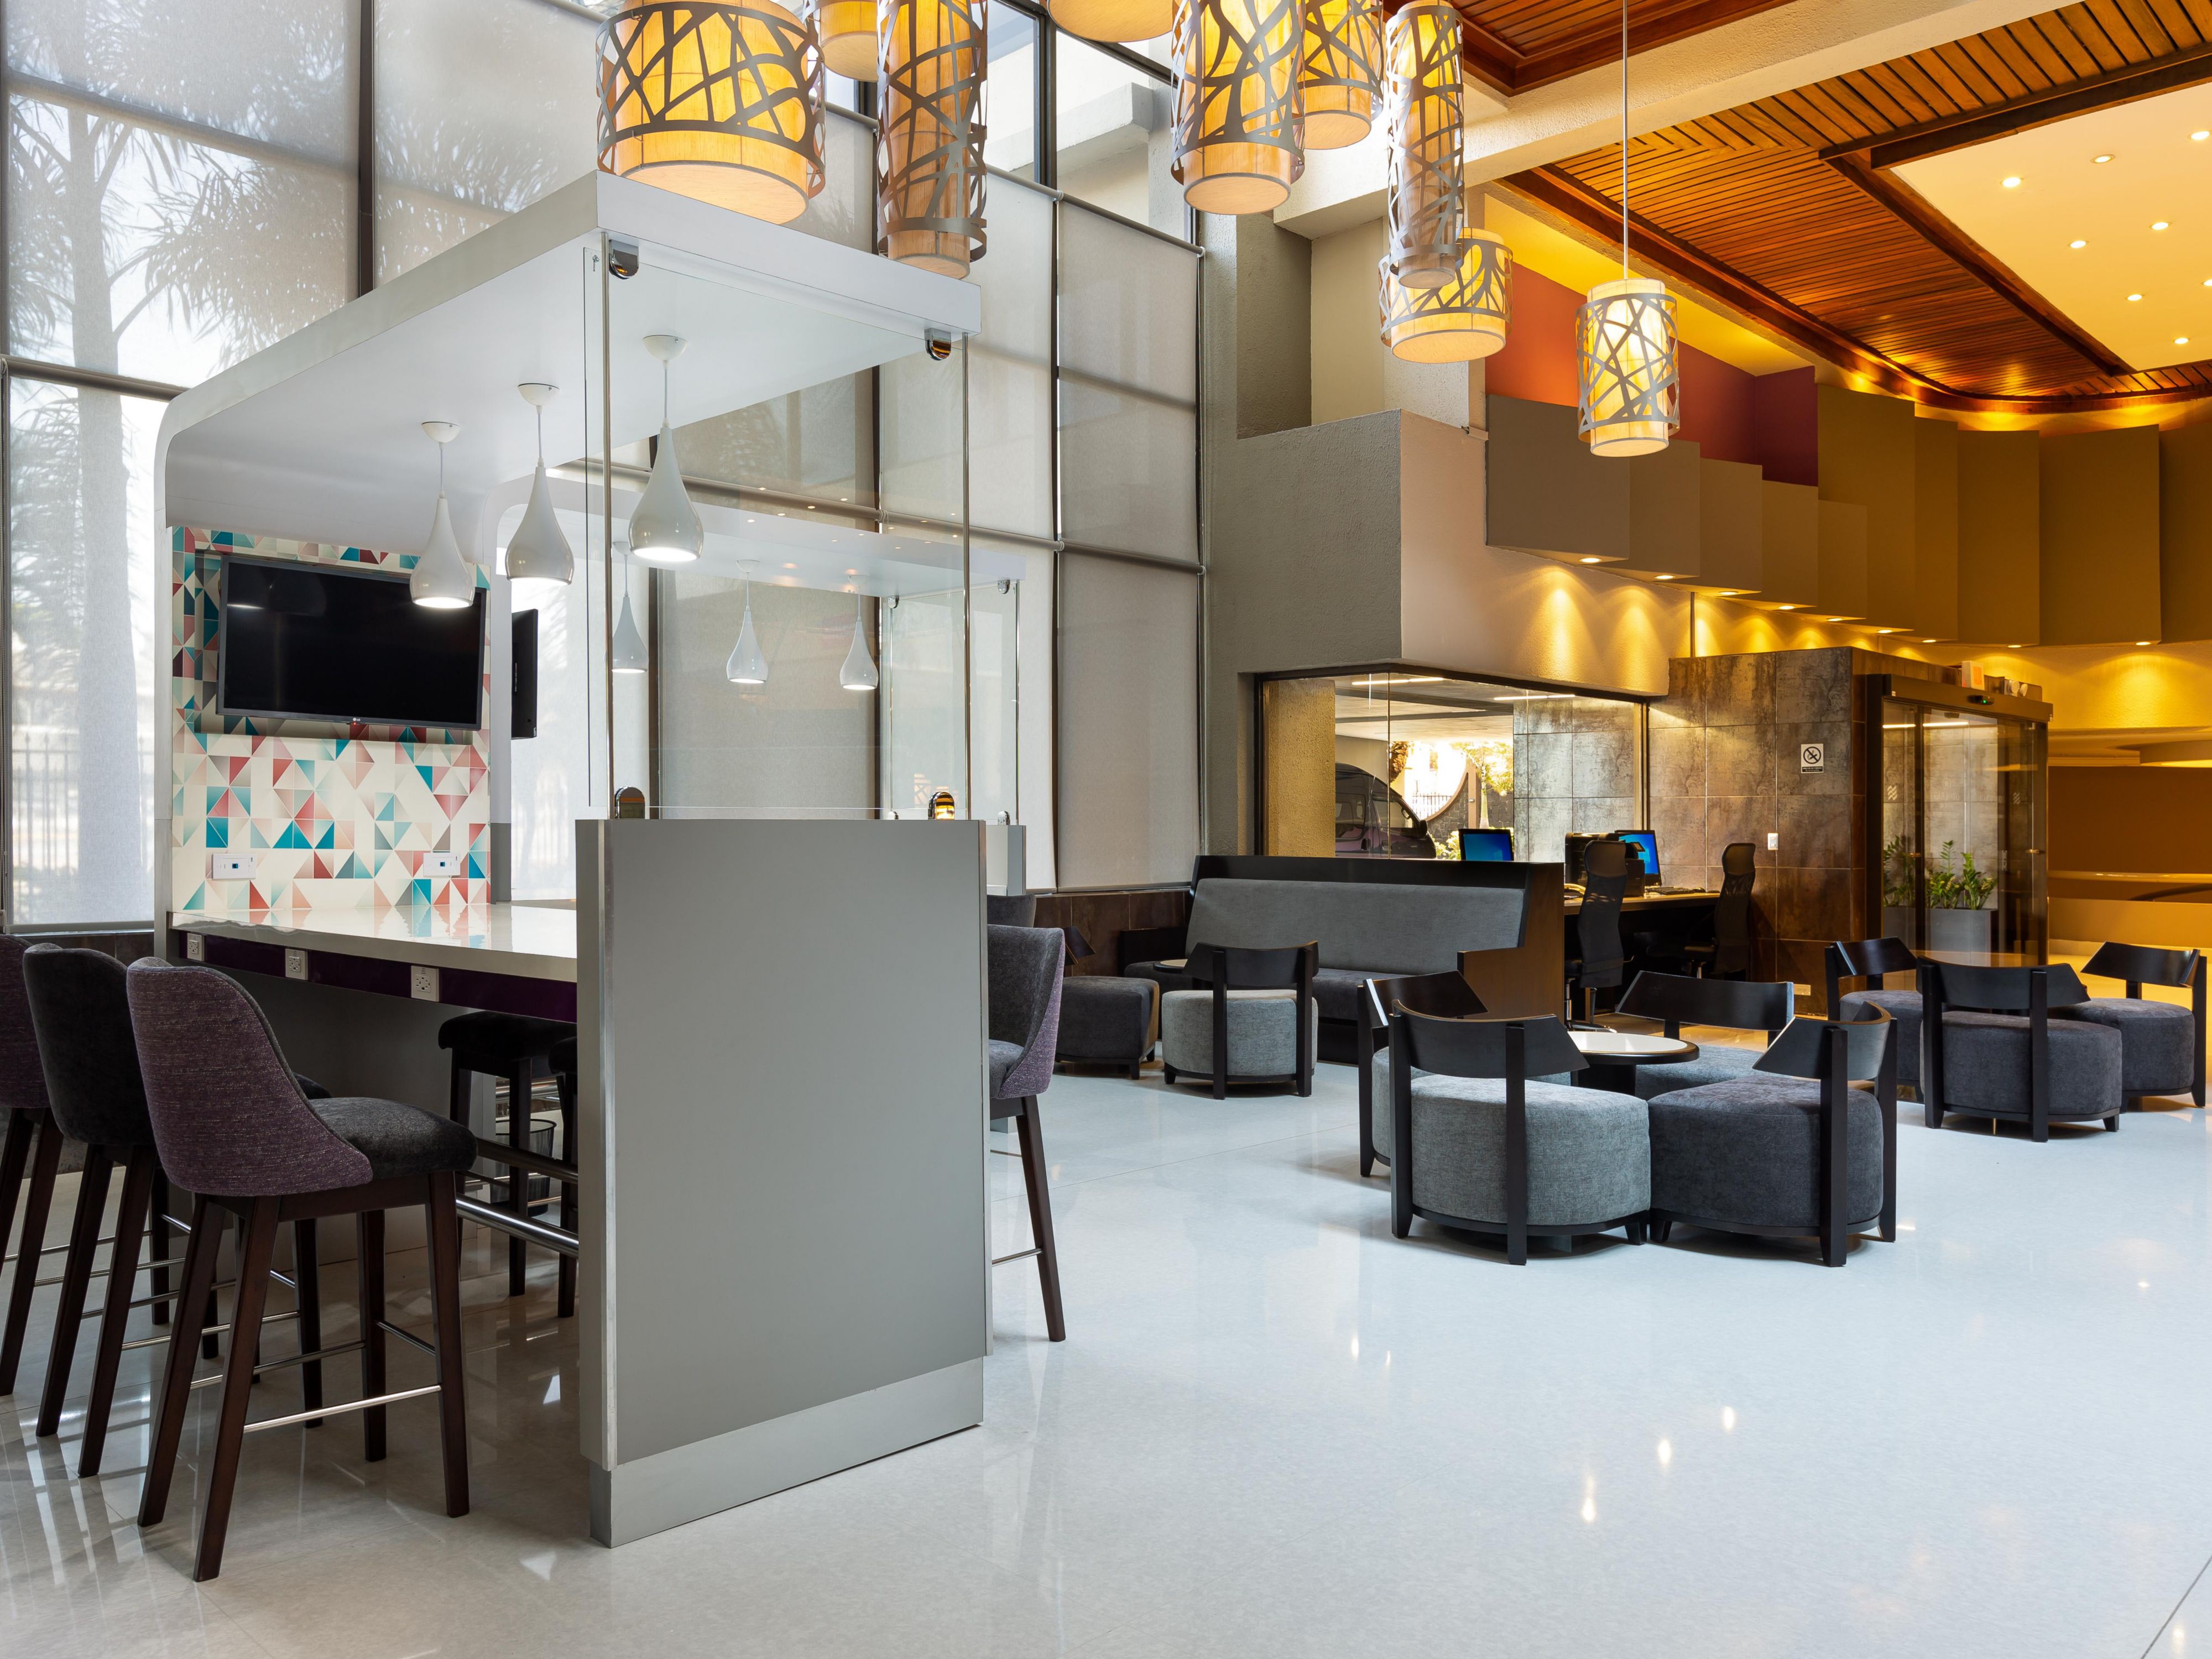 The Crowne Plaza San Jose La Sabana is conveniently located near a variety of government agencies, embassies and understands the needs of the government traveler.